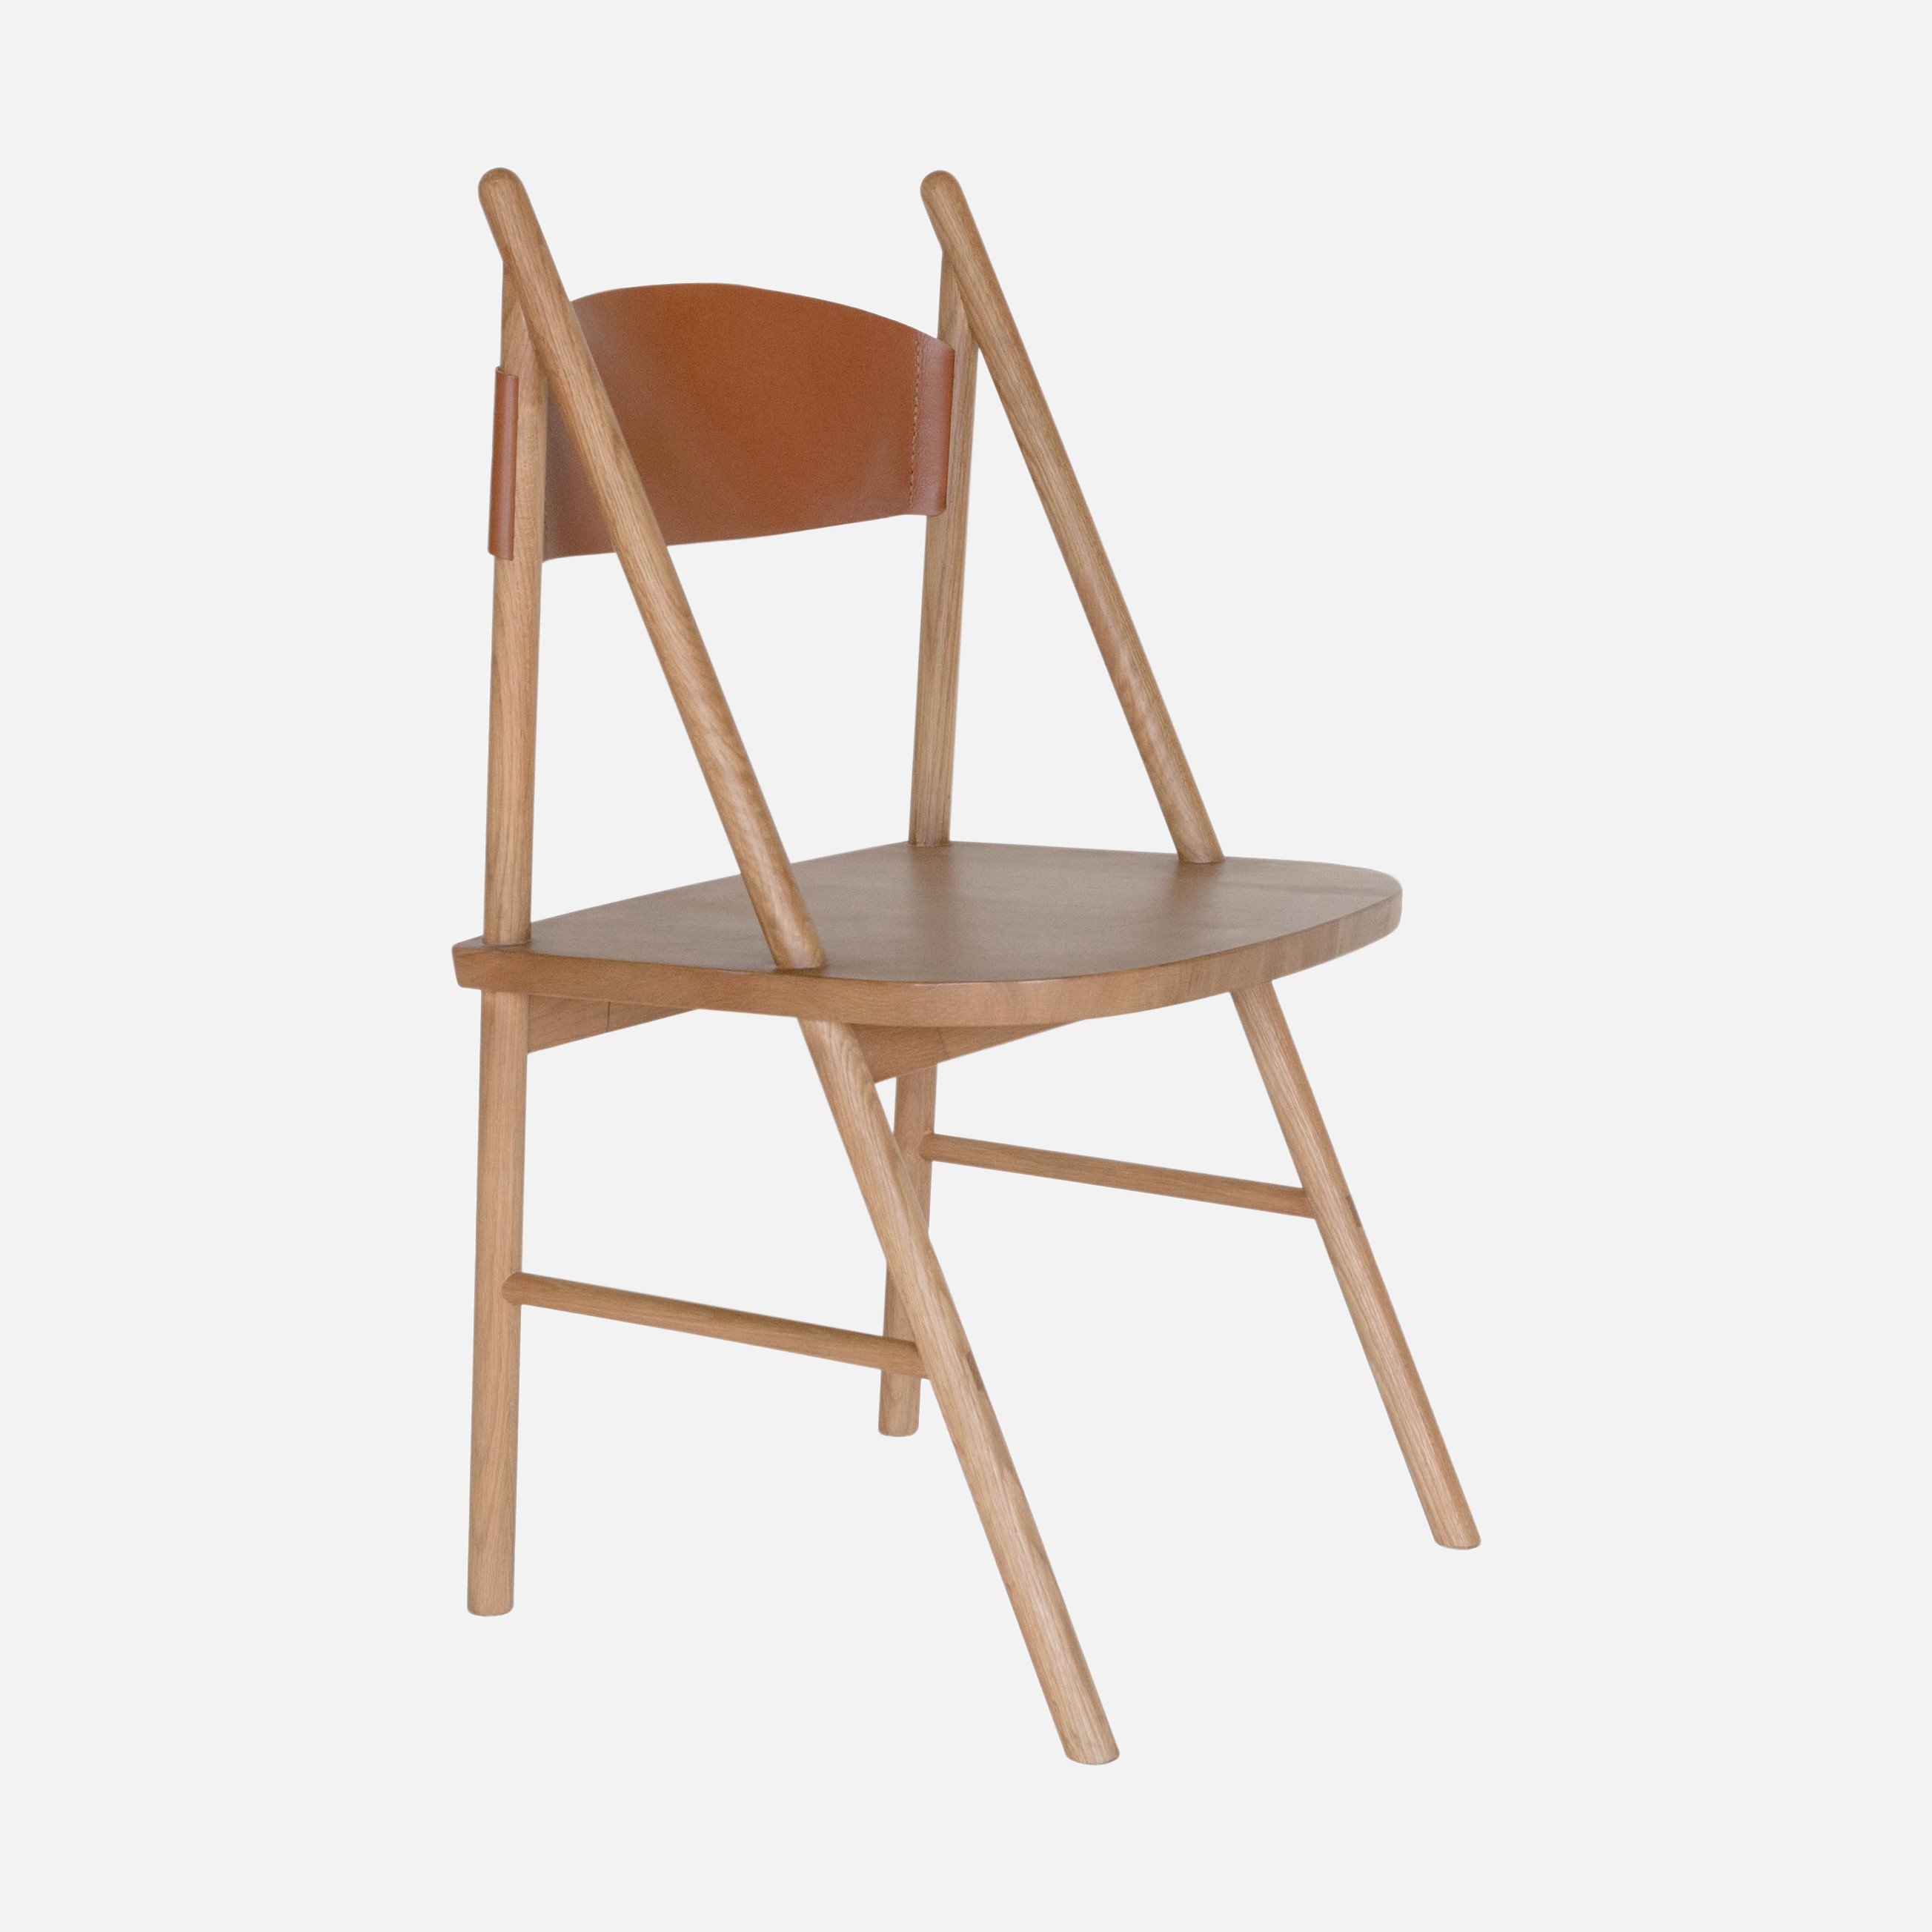 a wooden chair on a white background